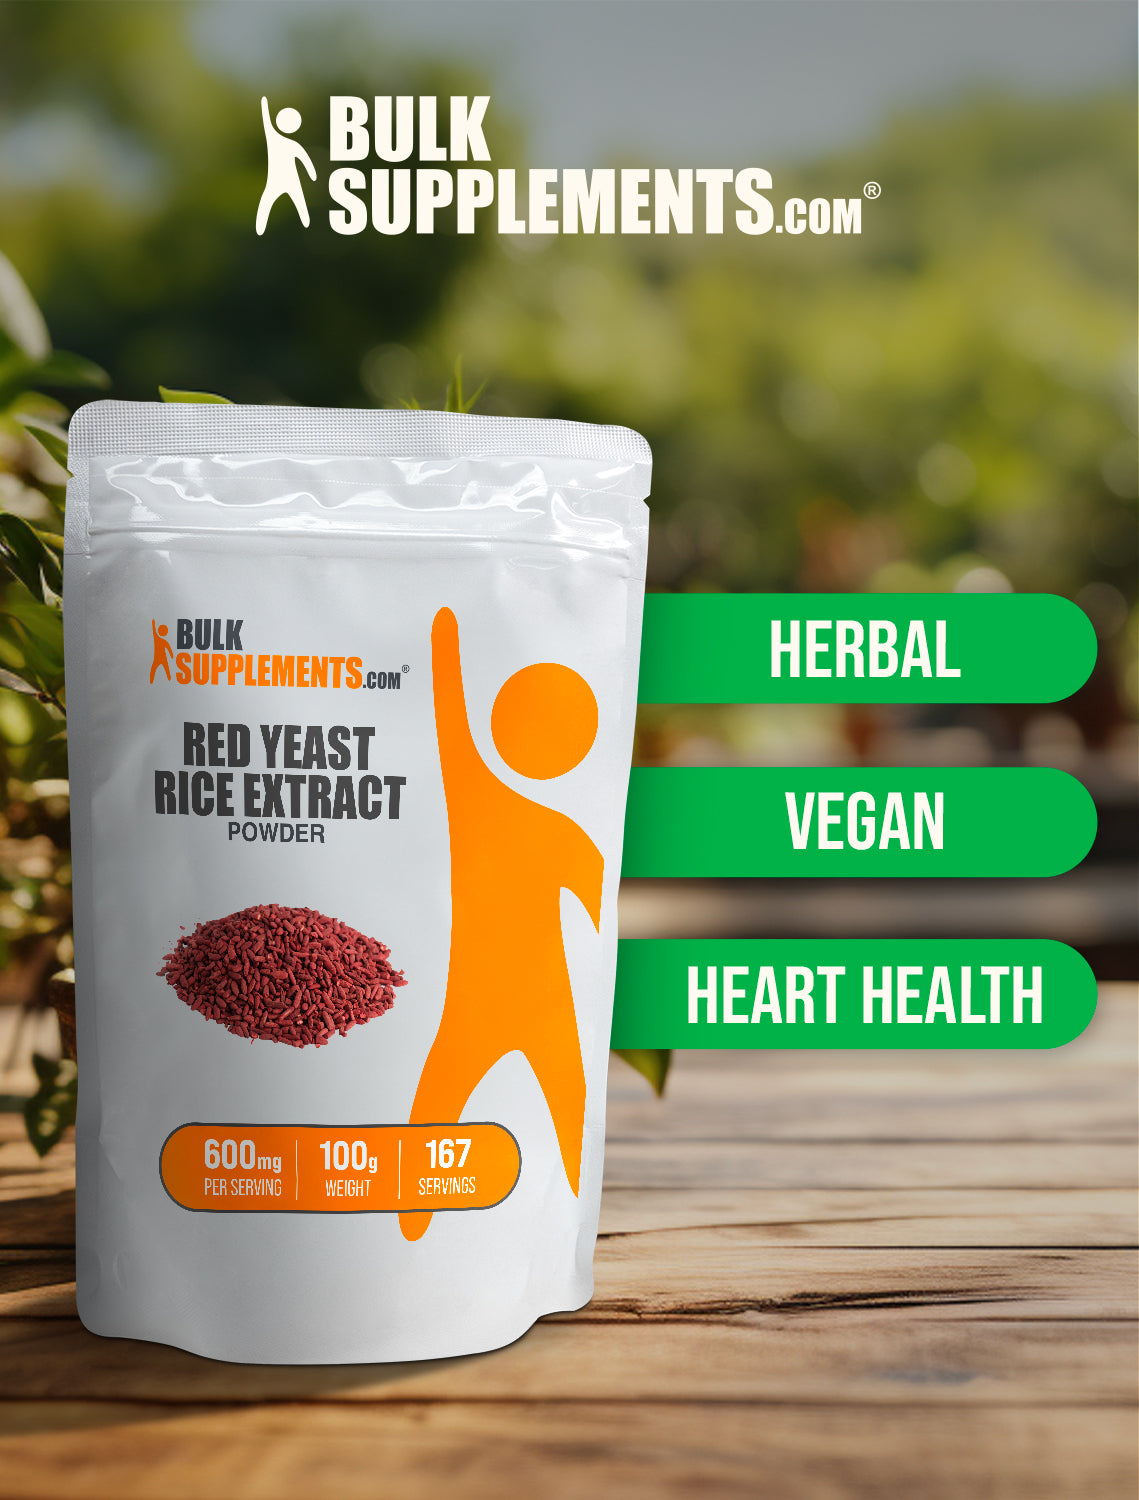 Red Yeast Rice Extract powder keyword image 100g